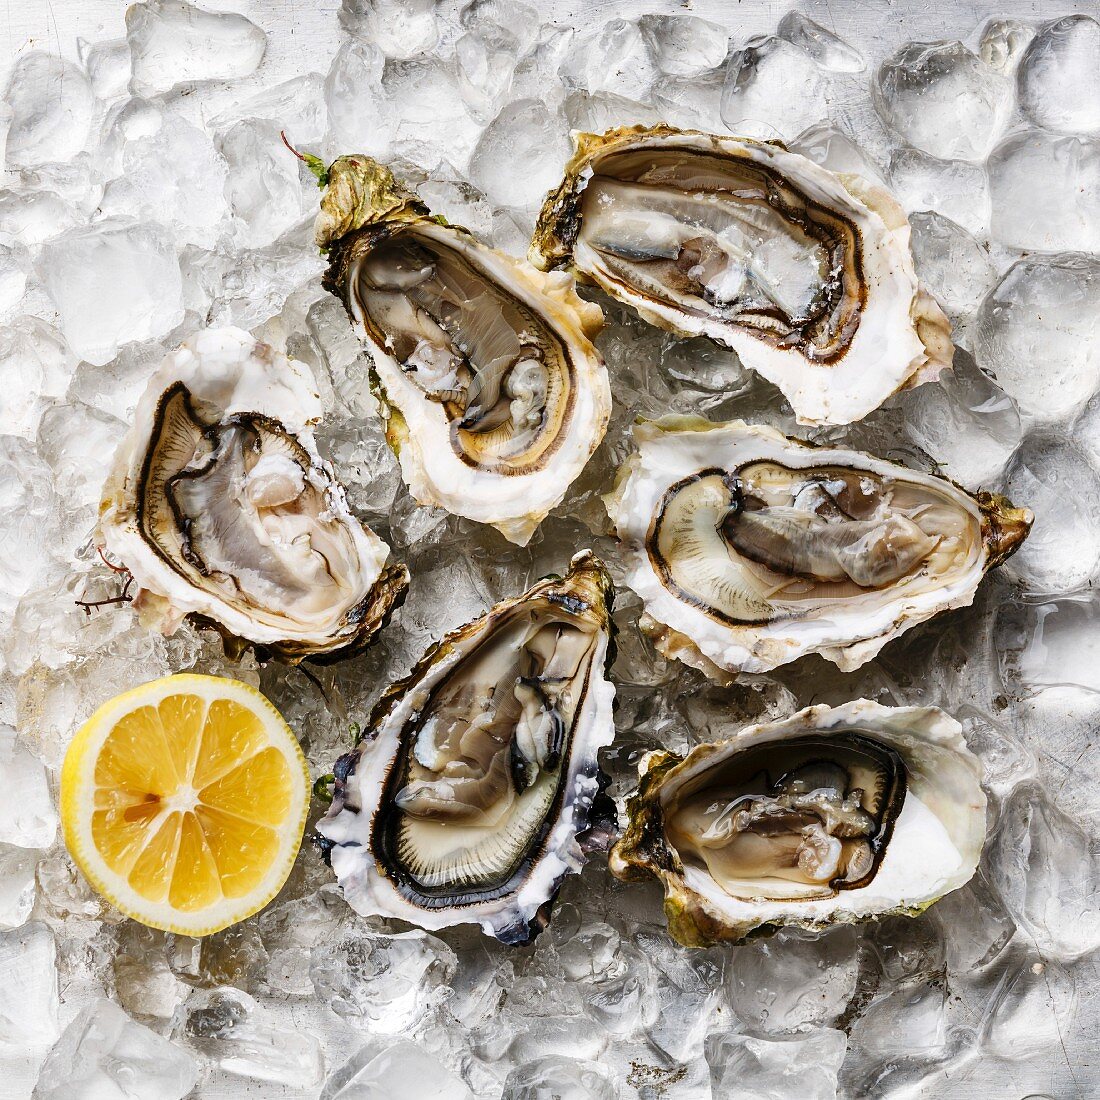 Open Oysters and lemon on ice